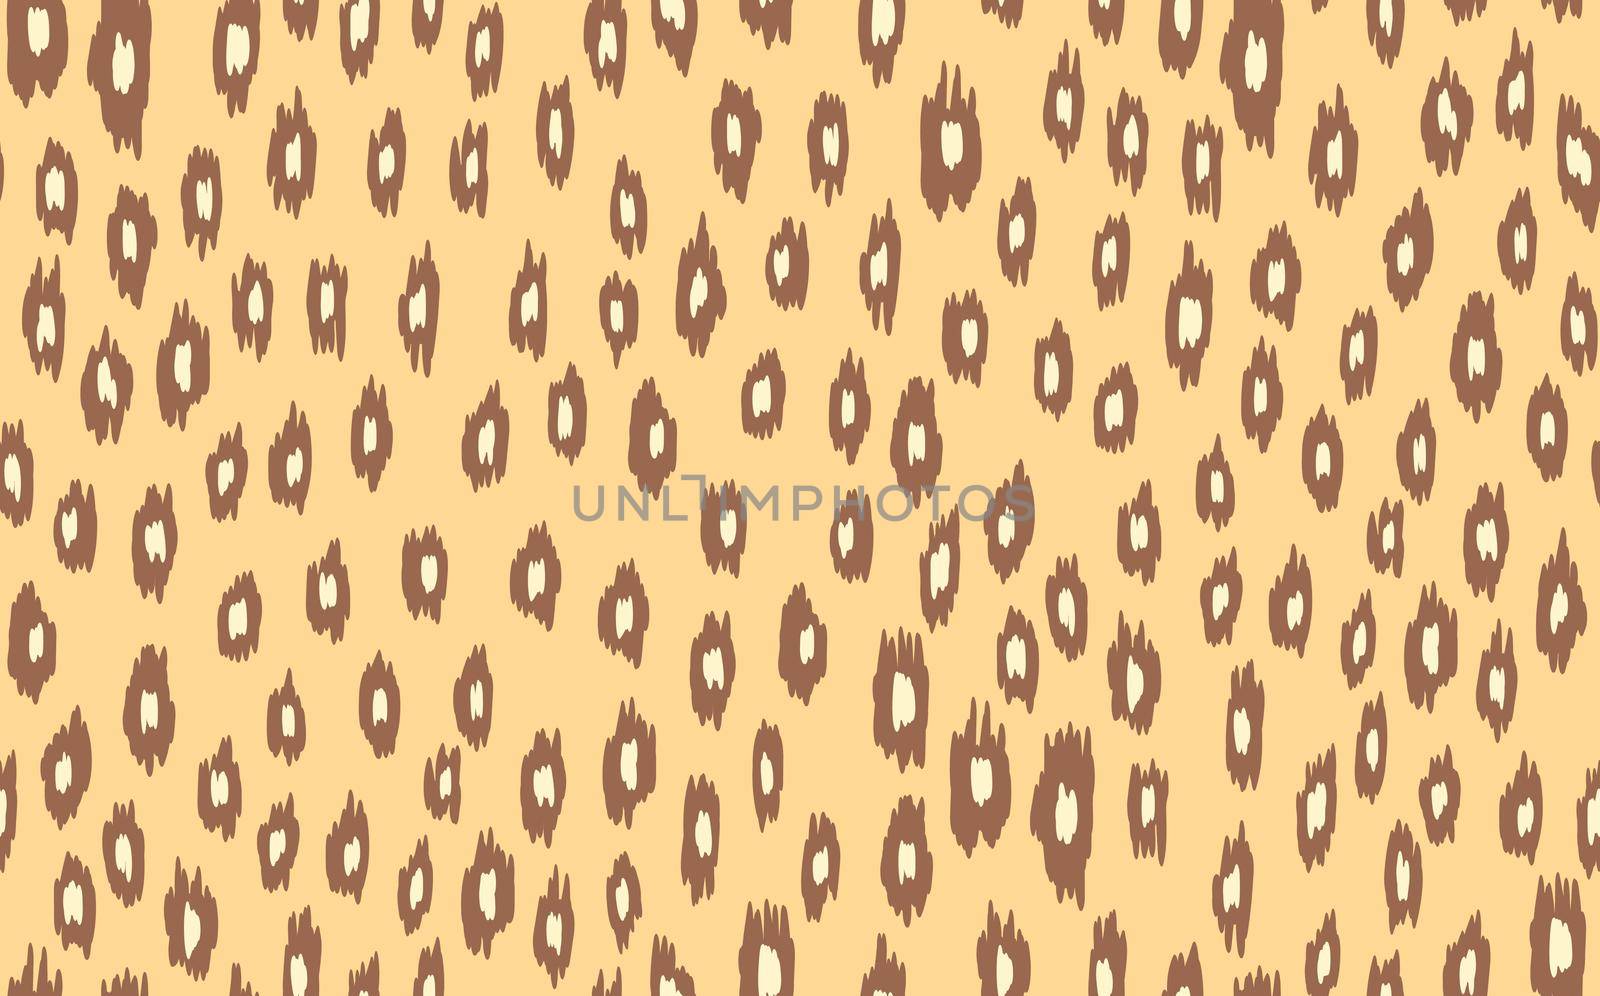 Abstract modern leopard seamless pattern. Animals trendy background. Beige and brown decorative vector stock illustration for print, card, postcard, fabric, textile. Modern ornament of stylized skin by allaku